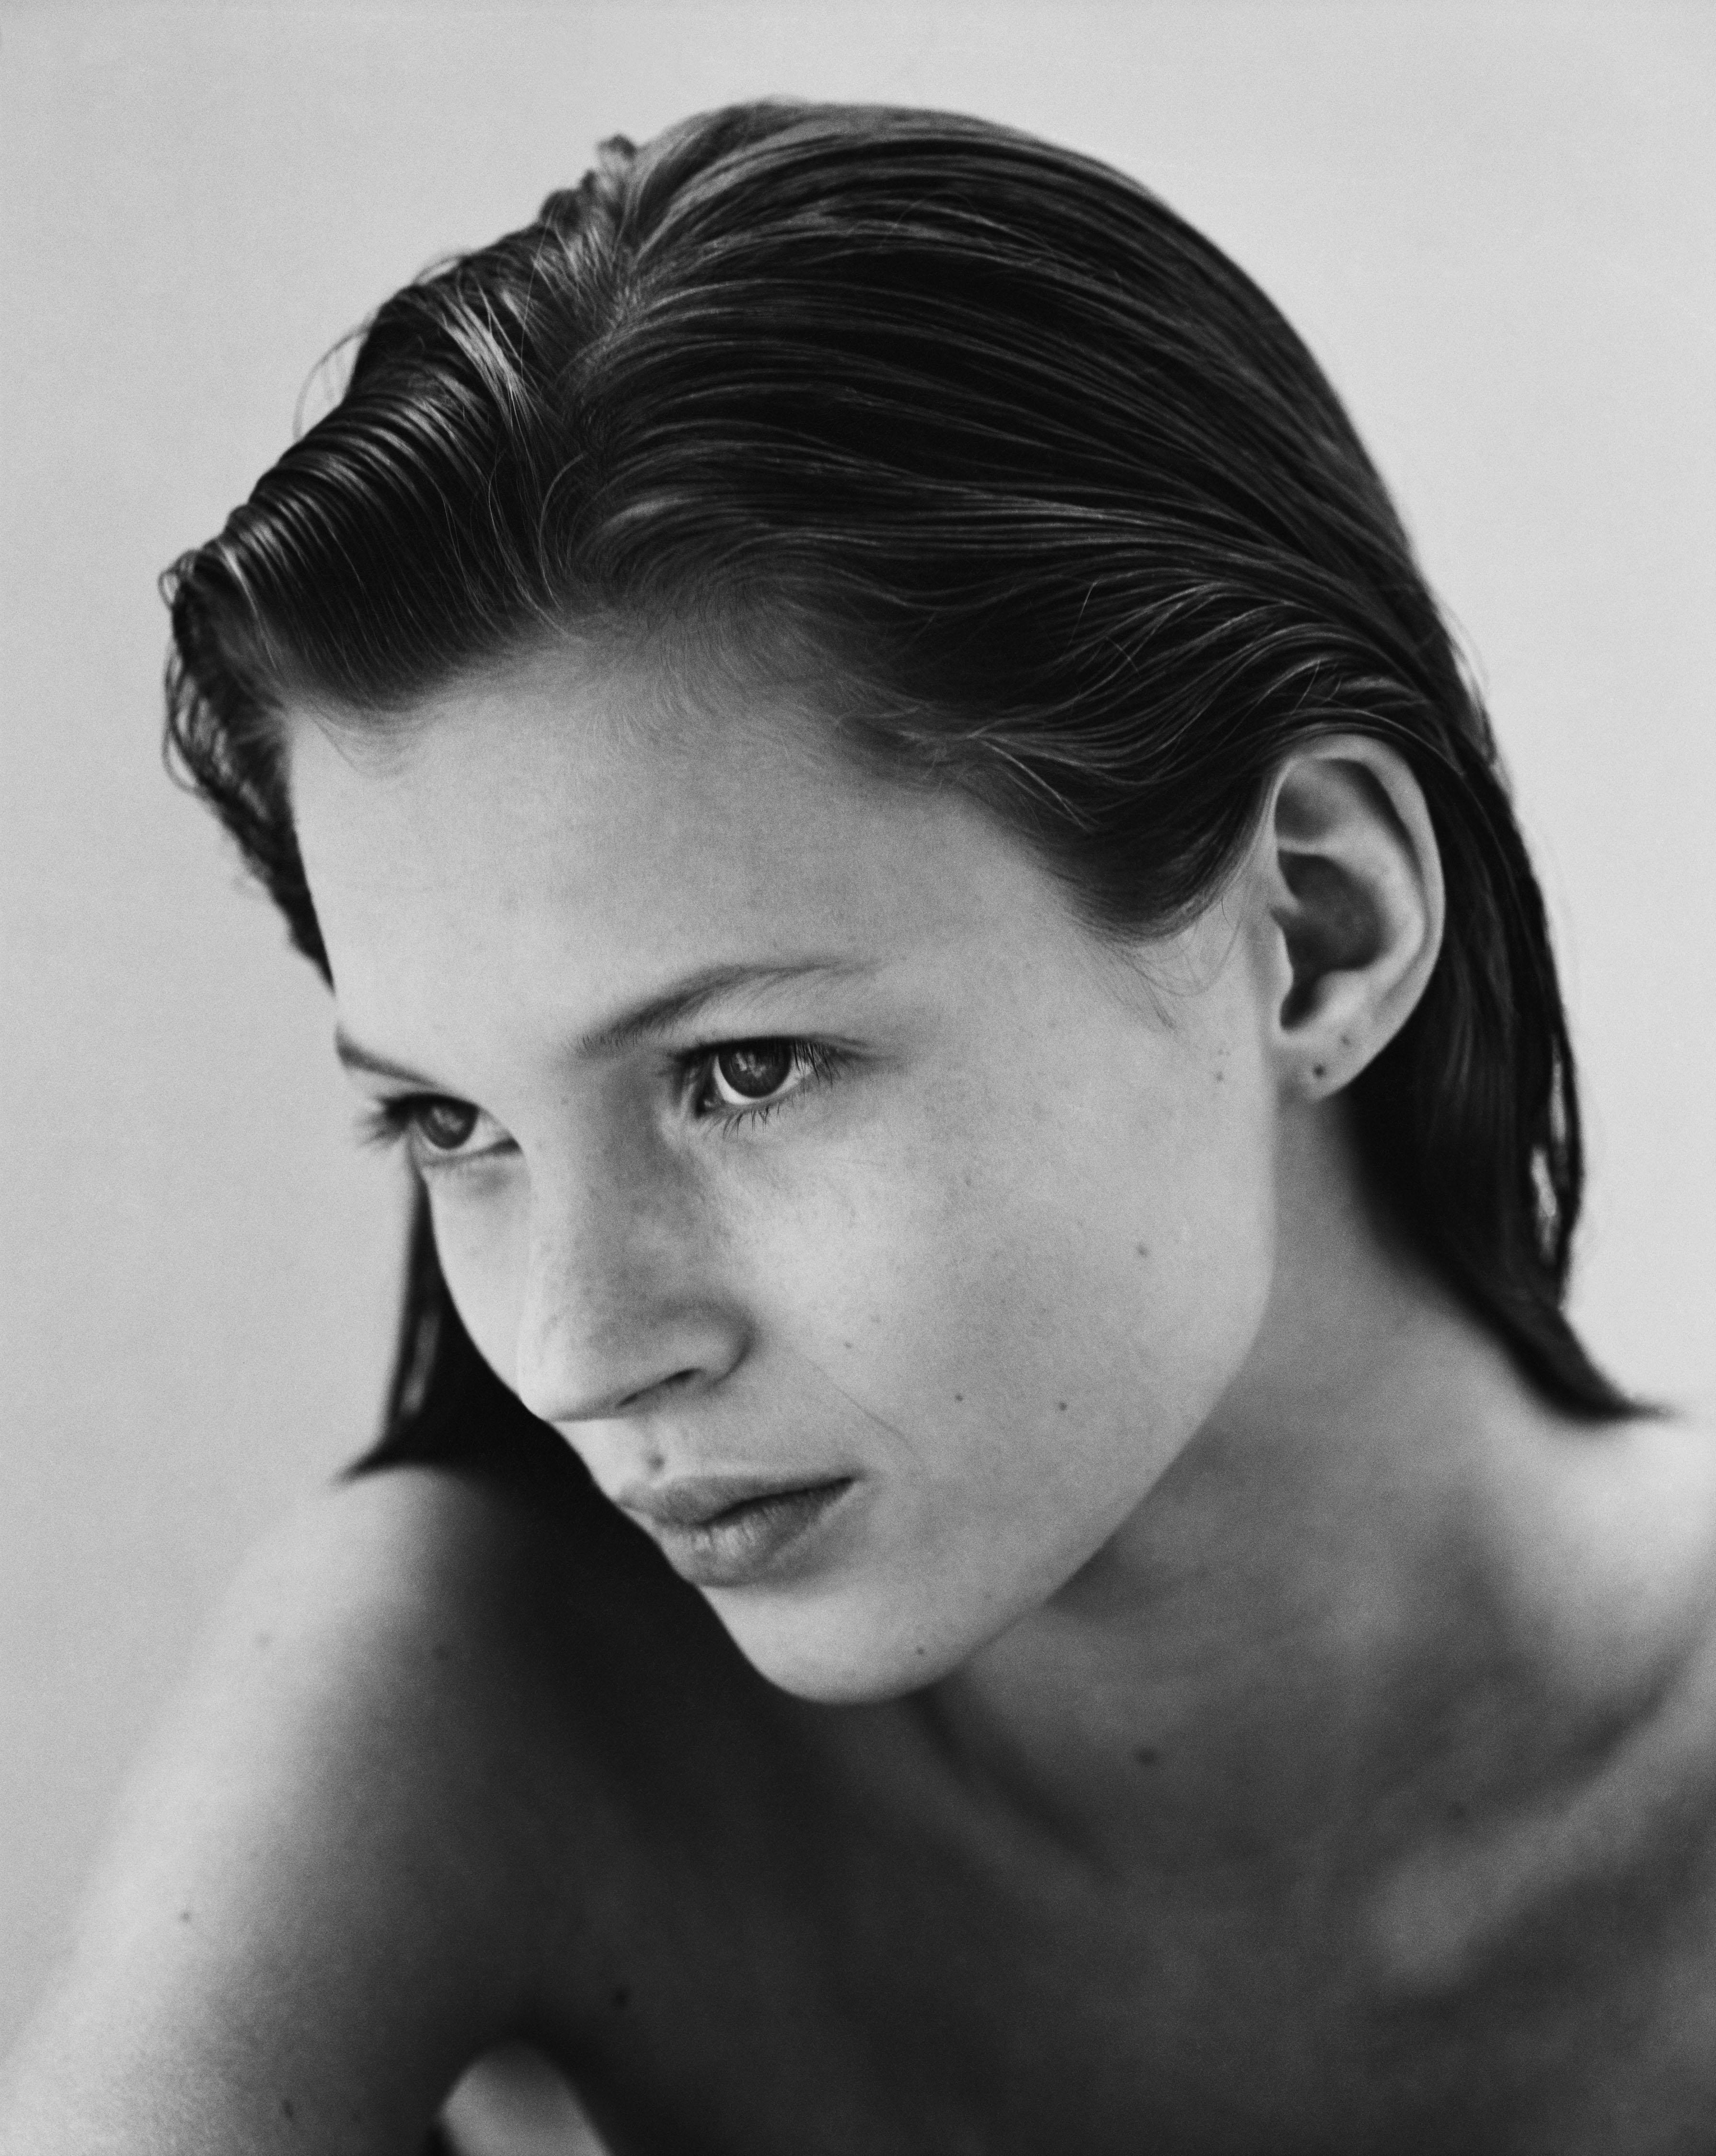 Kate Moss at 16 by Jake Chessum